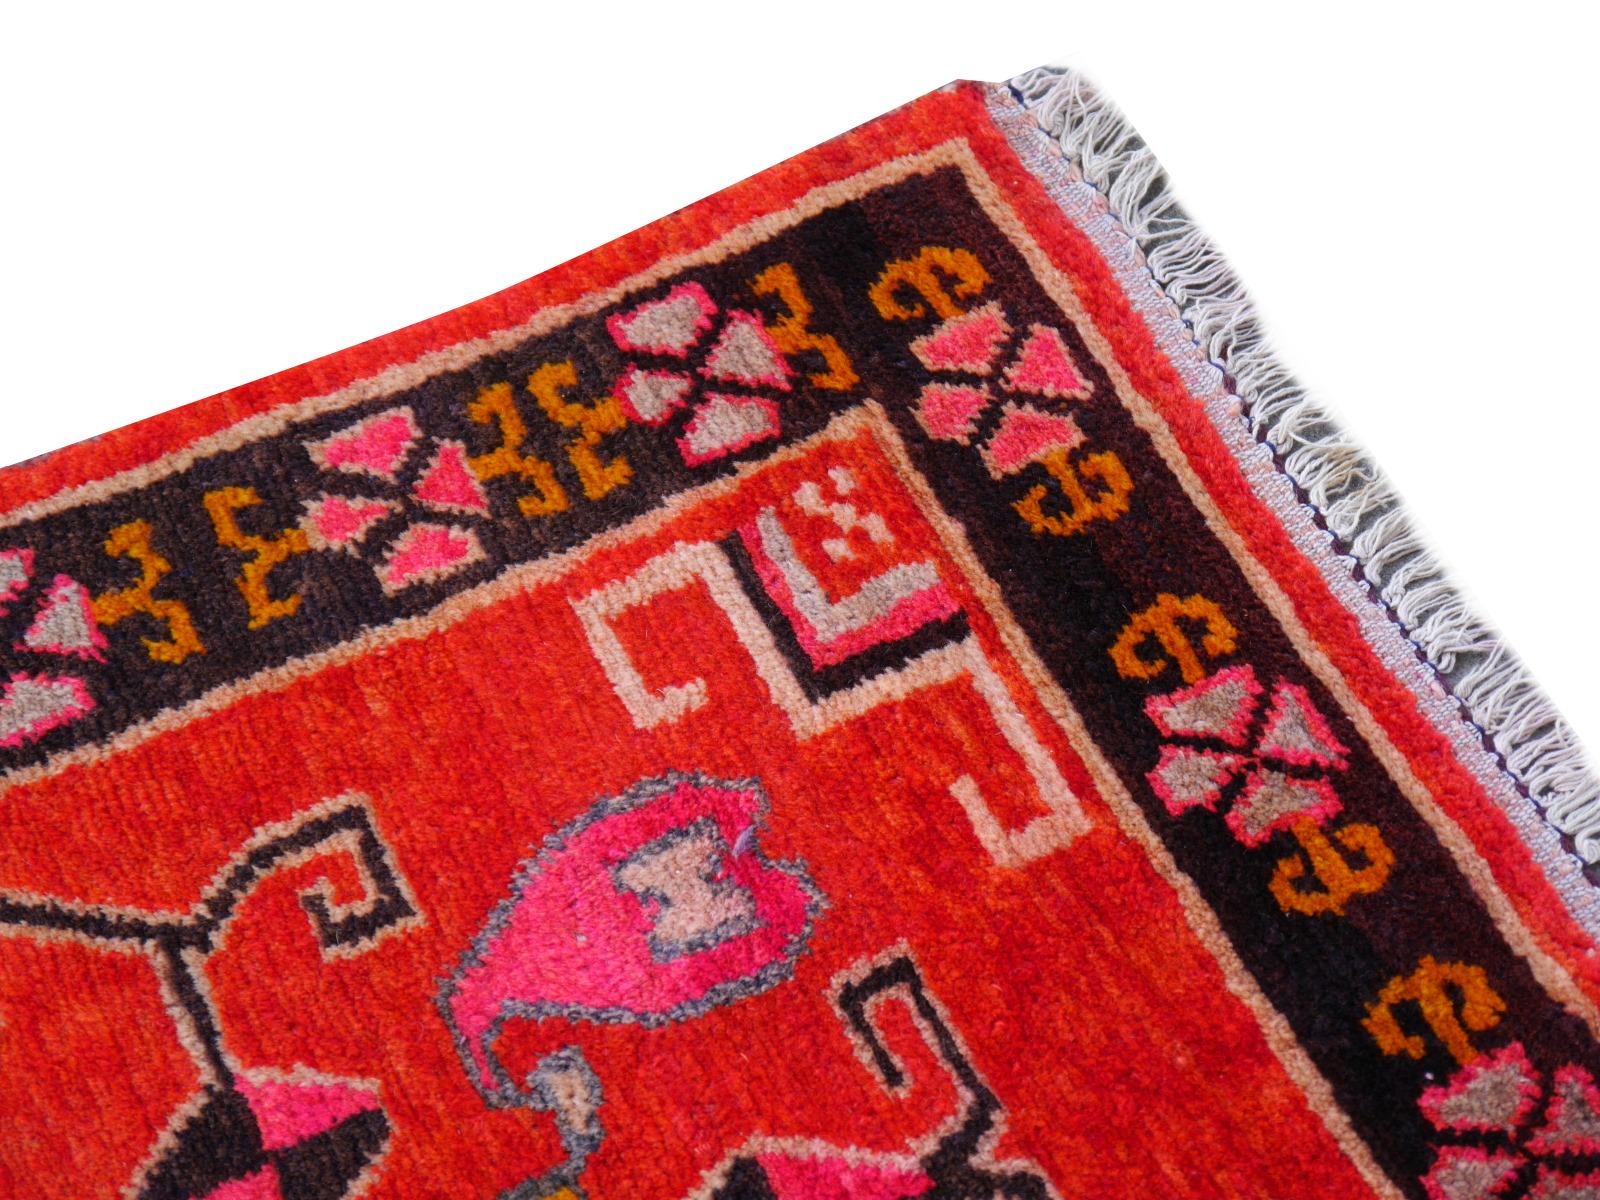 Vintage hand knotted Tibetan meditation rug

This beautiful Tibetan rug was hand knotted using hand spun Tibetan highland wool - one of the finest wools available from sheep living above 9000 ft altitude. The size of the rug is traditional - these